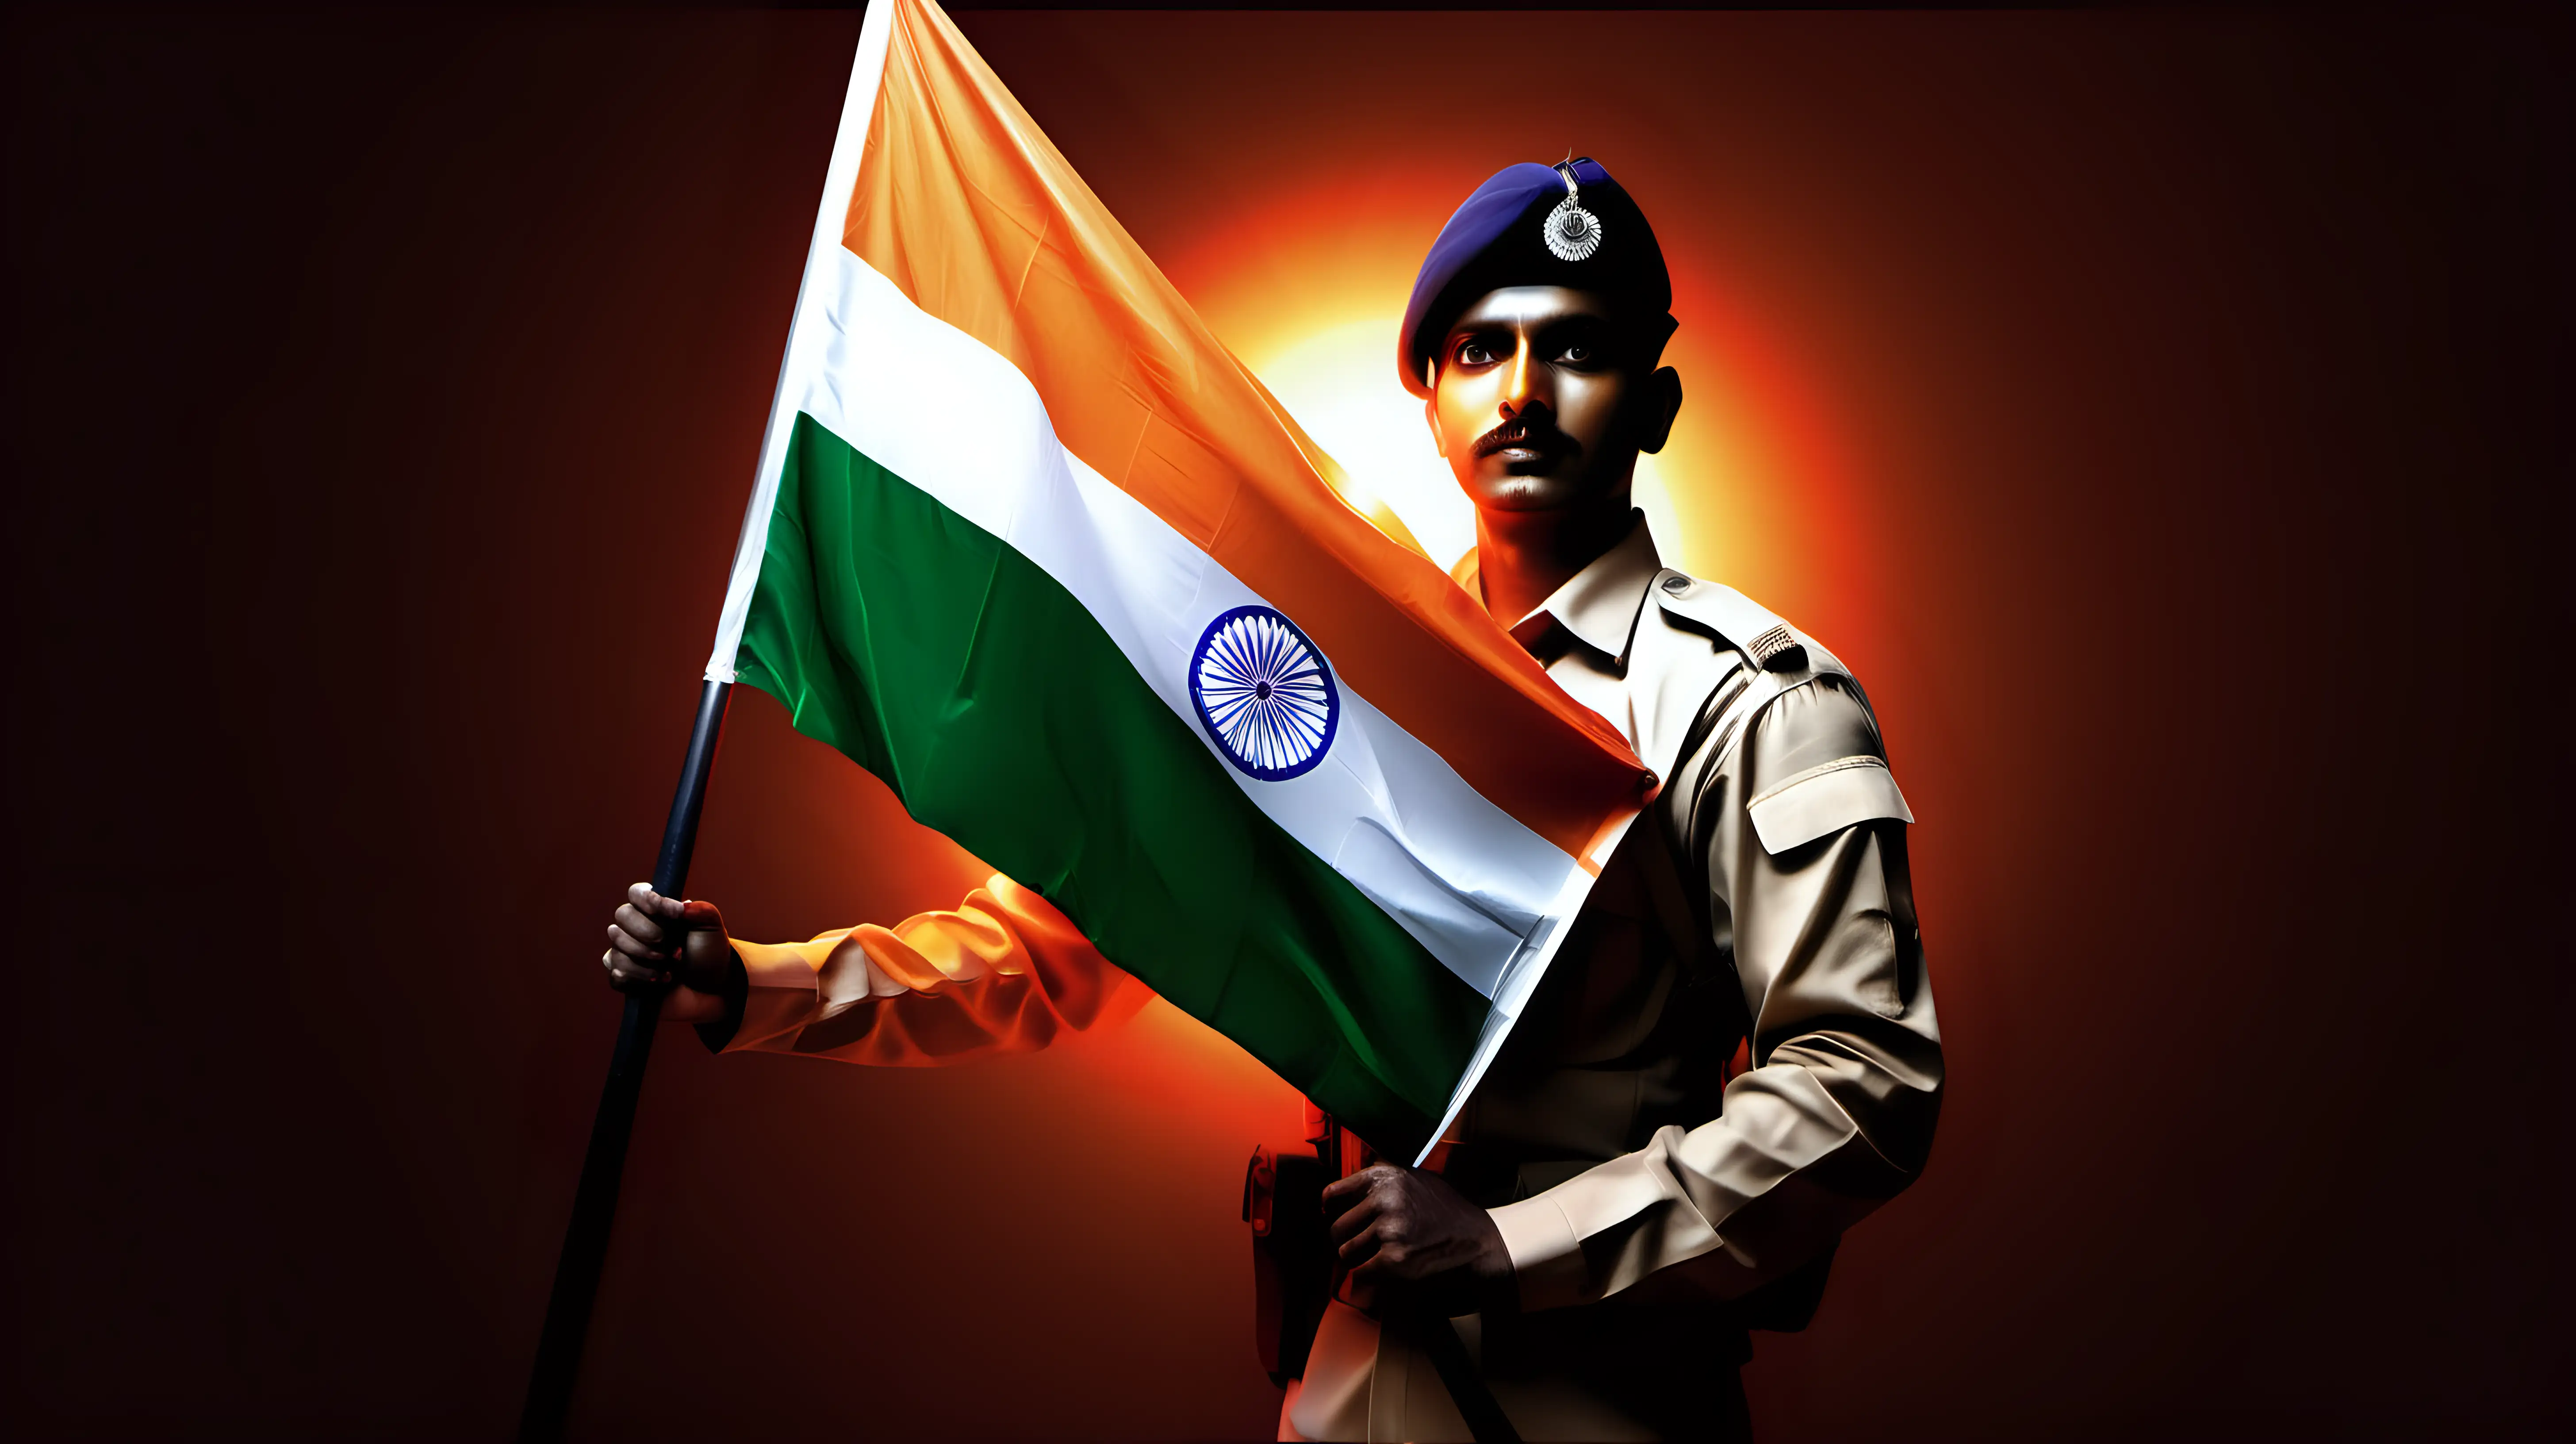 Determined Soldier Embracing Glowing Indian Flag